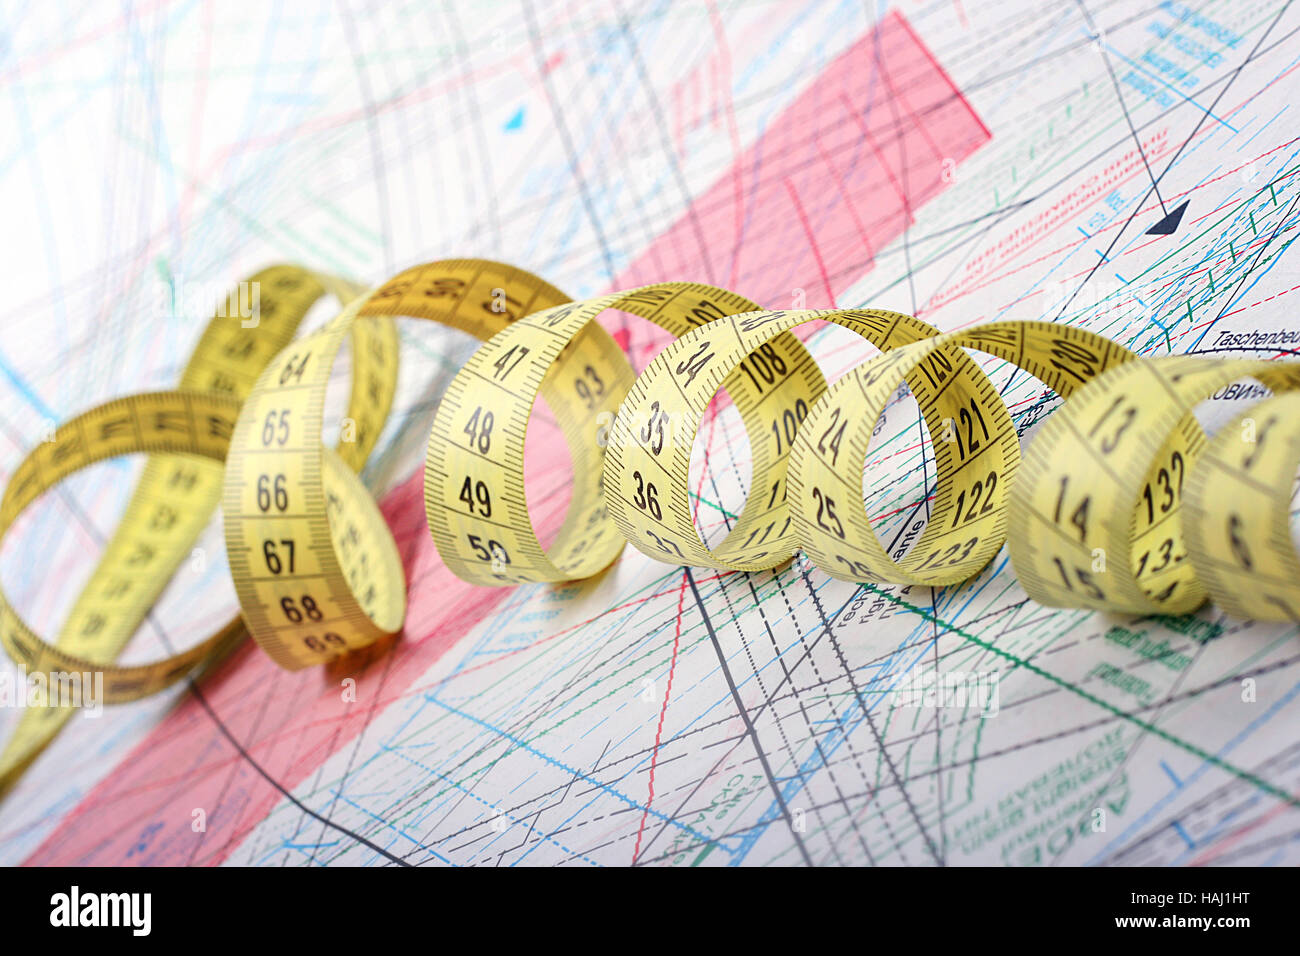 tailor measuring tape on patterns of clothing Stock Photo